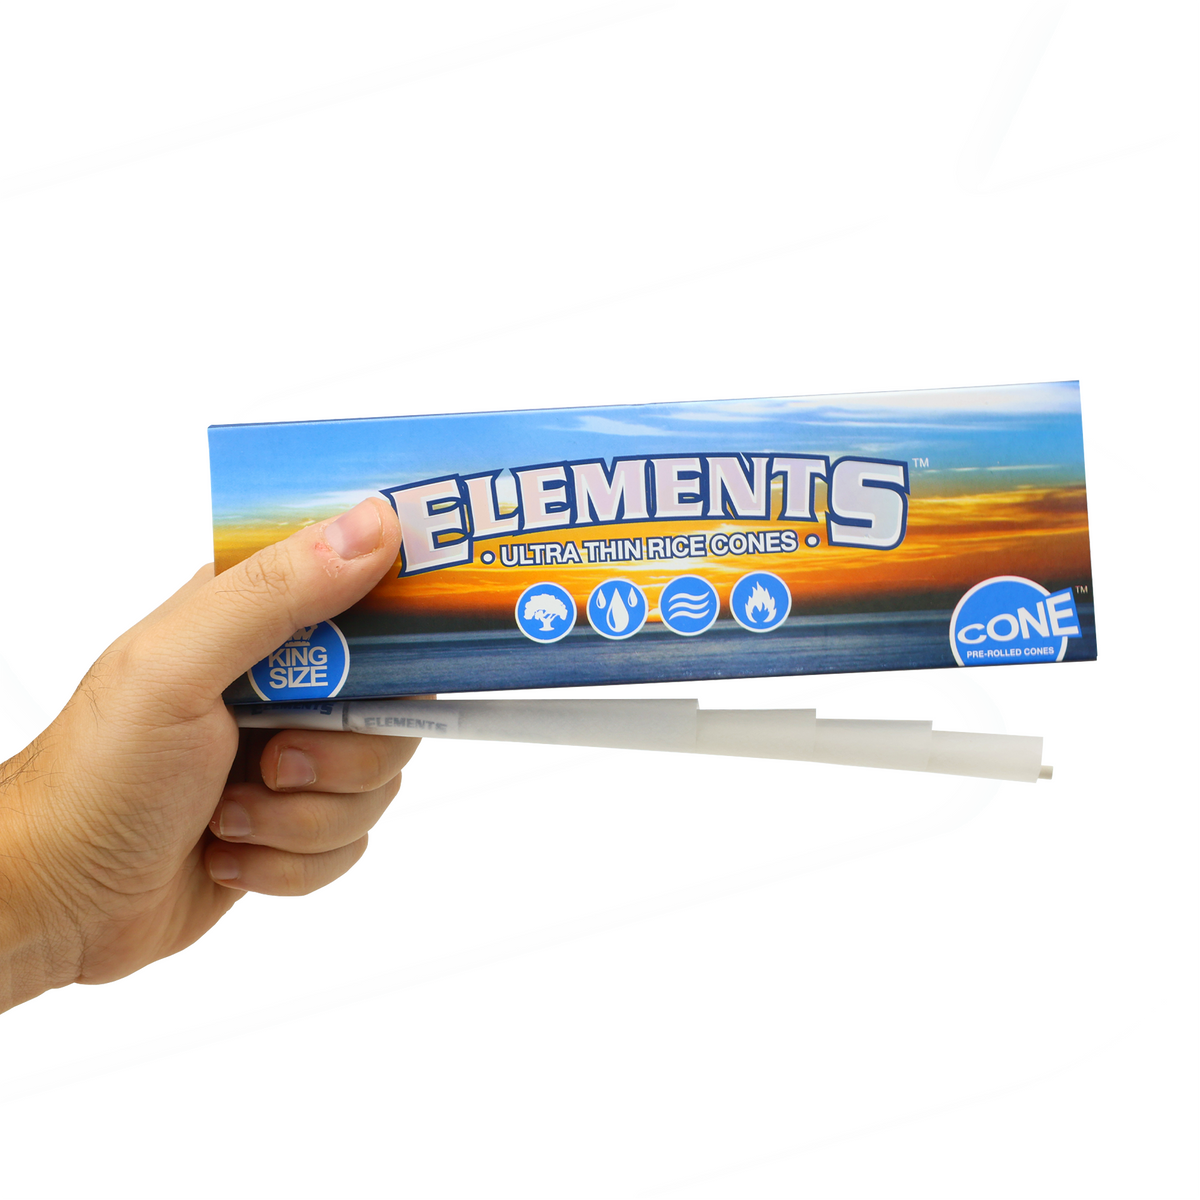 Elements King Size Cones - 40 Pack Cones ELE00360-1/40 esd-official